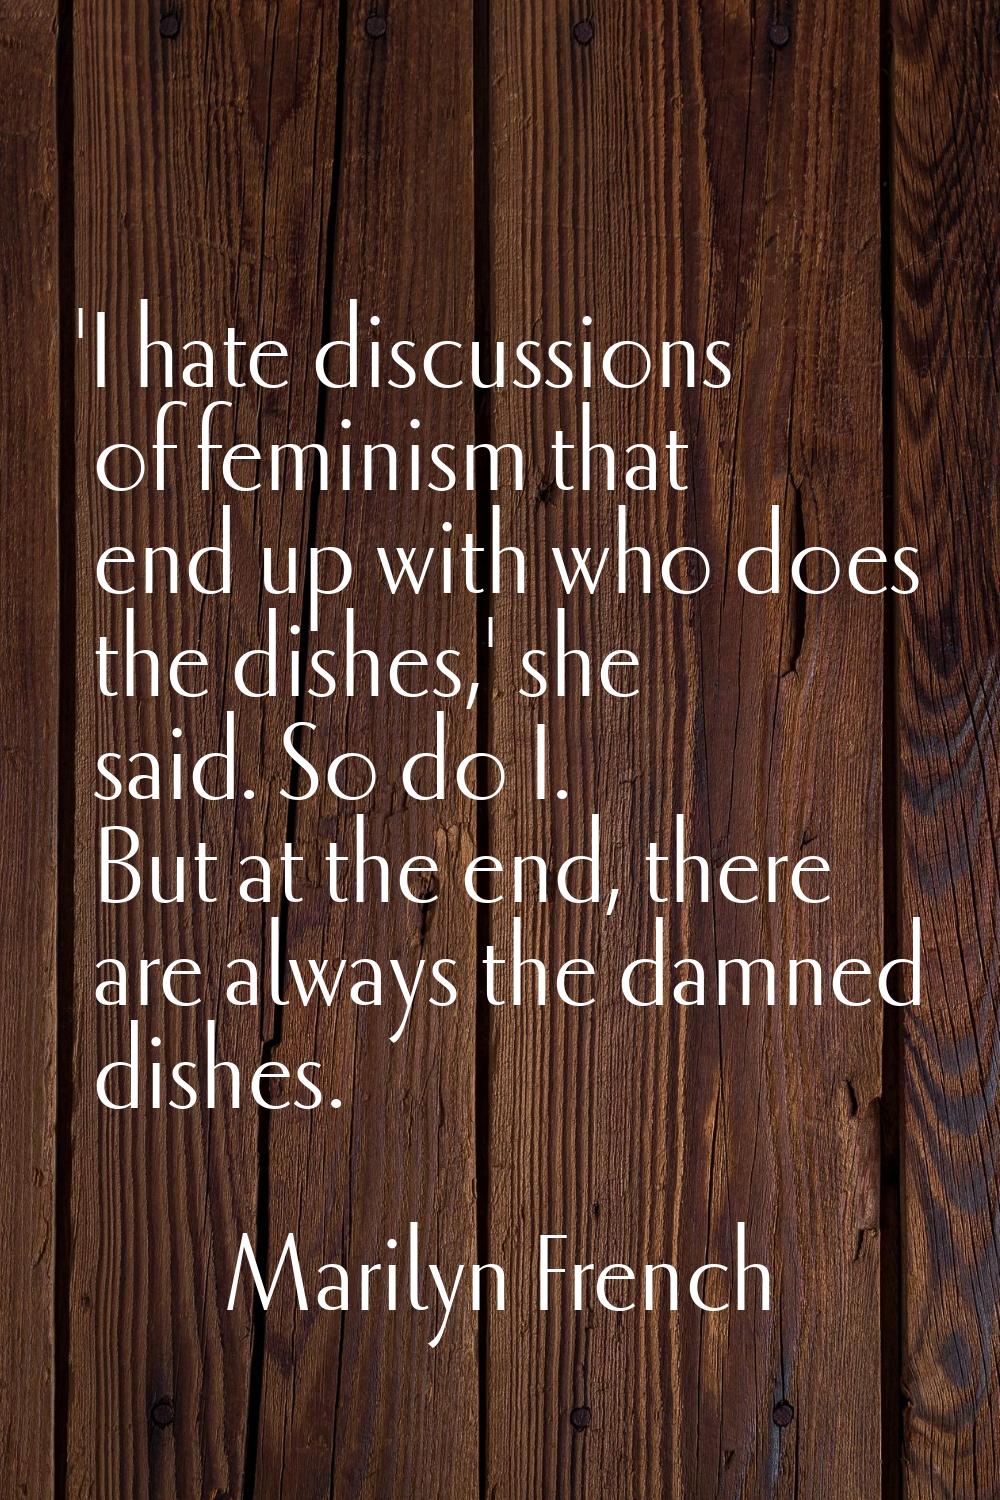 'I hate discussions of feminism that end up with who does the dishes,' she said. So do I. But at th